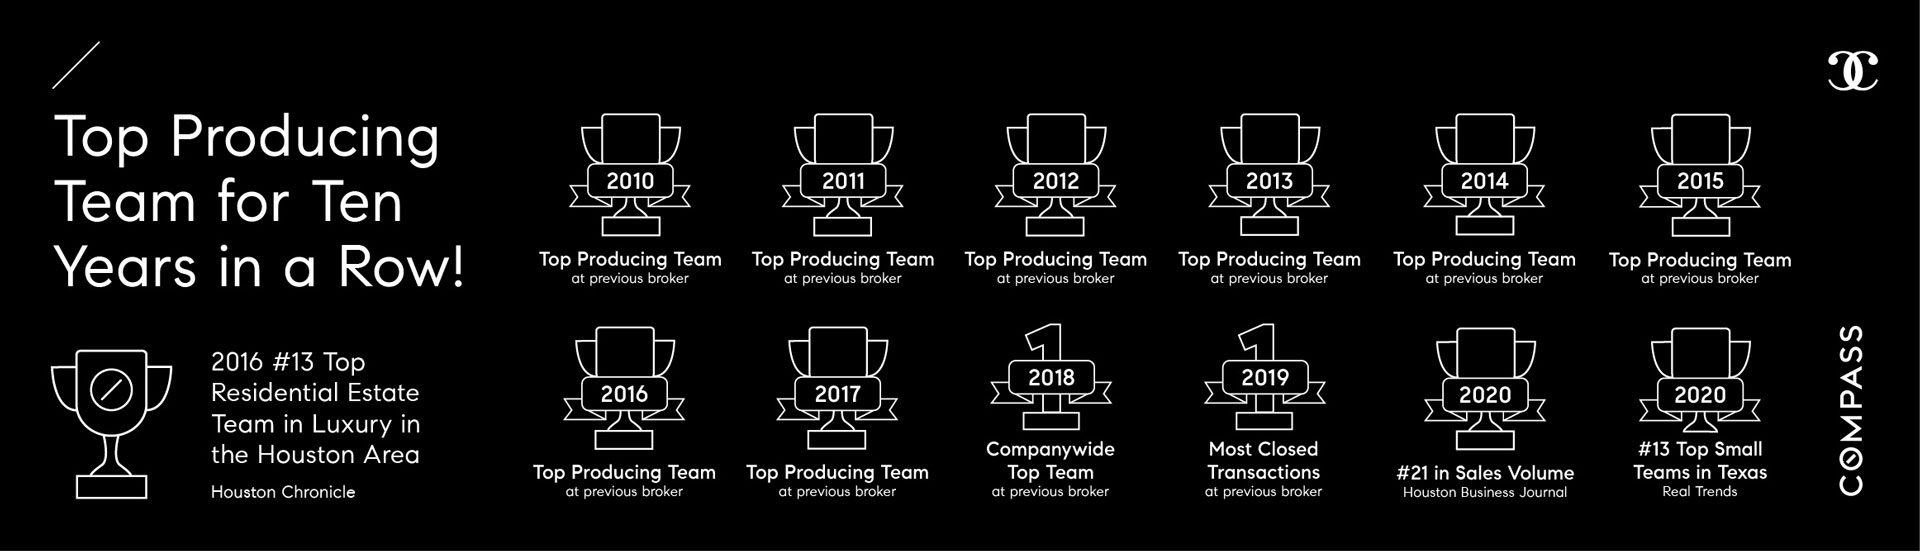 Top Producing Team for Ten Years in a Row!